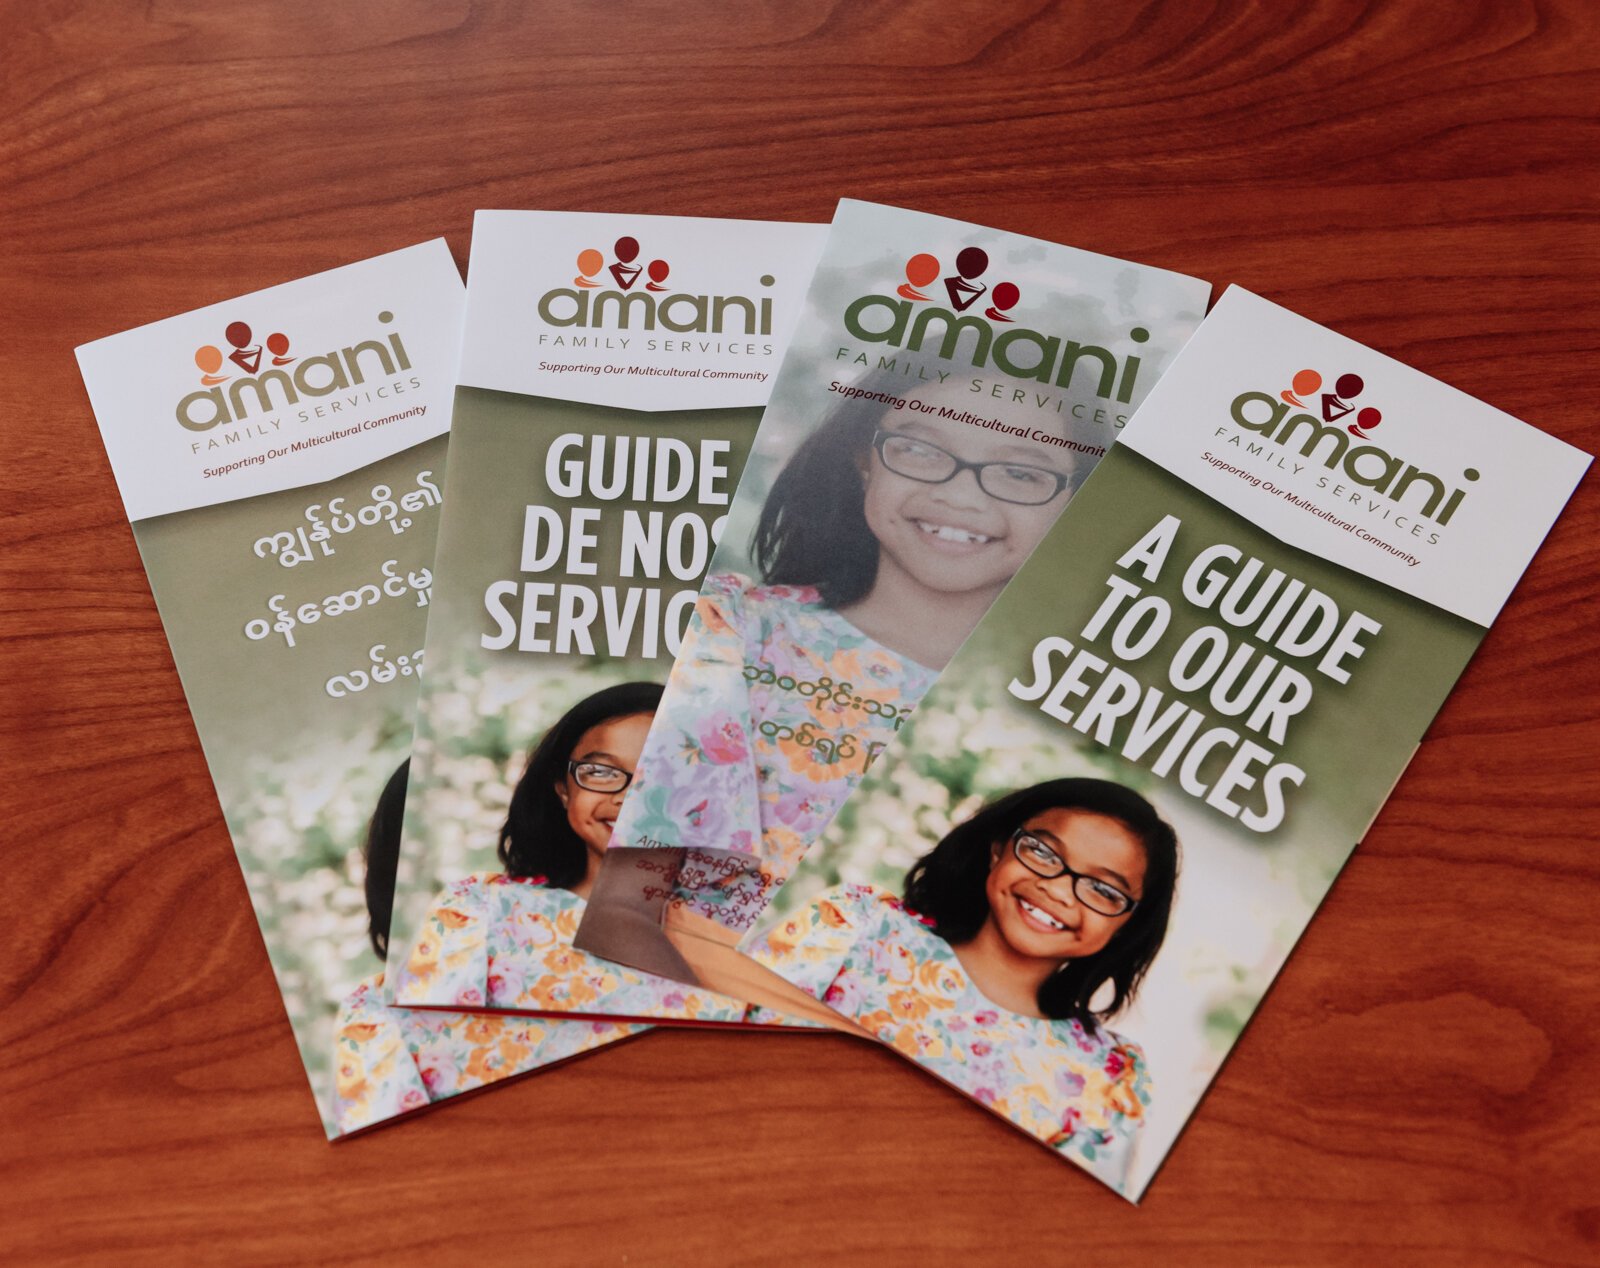 Pamphlets of services which are offered in 3 different languages at Amani Family Services in Fort Wayne.